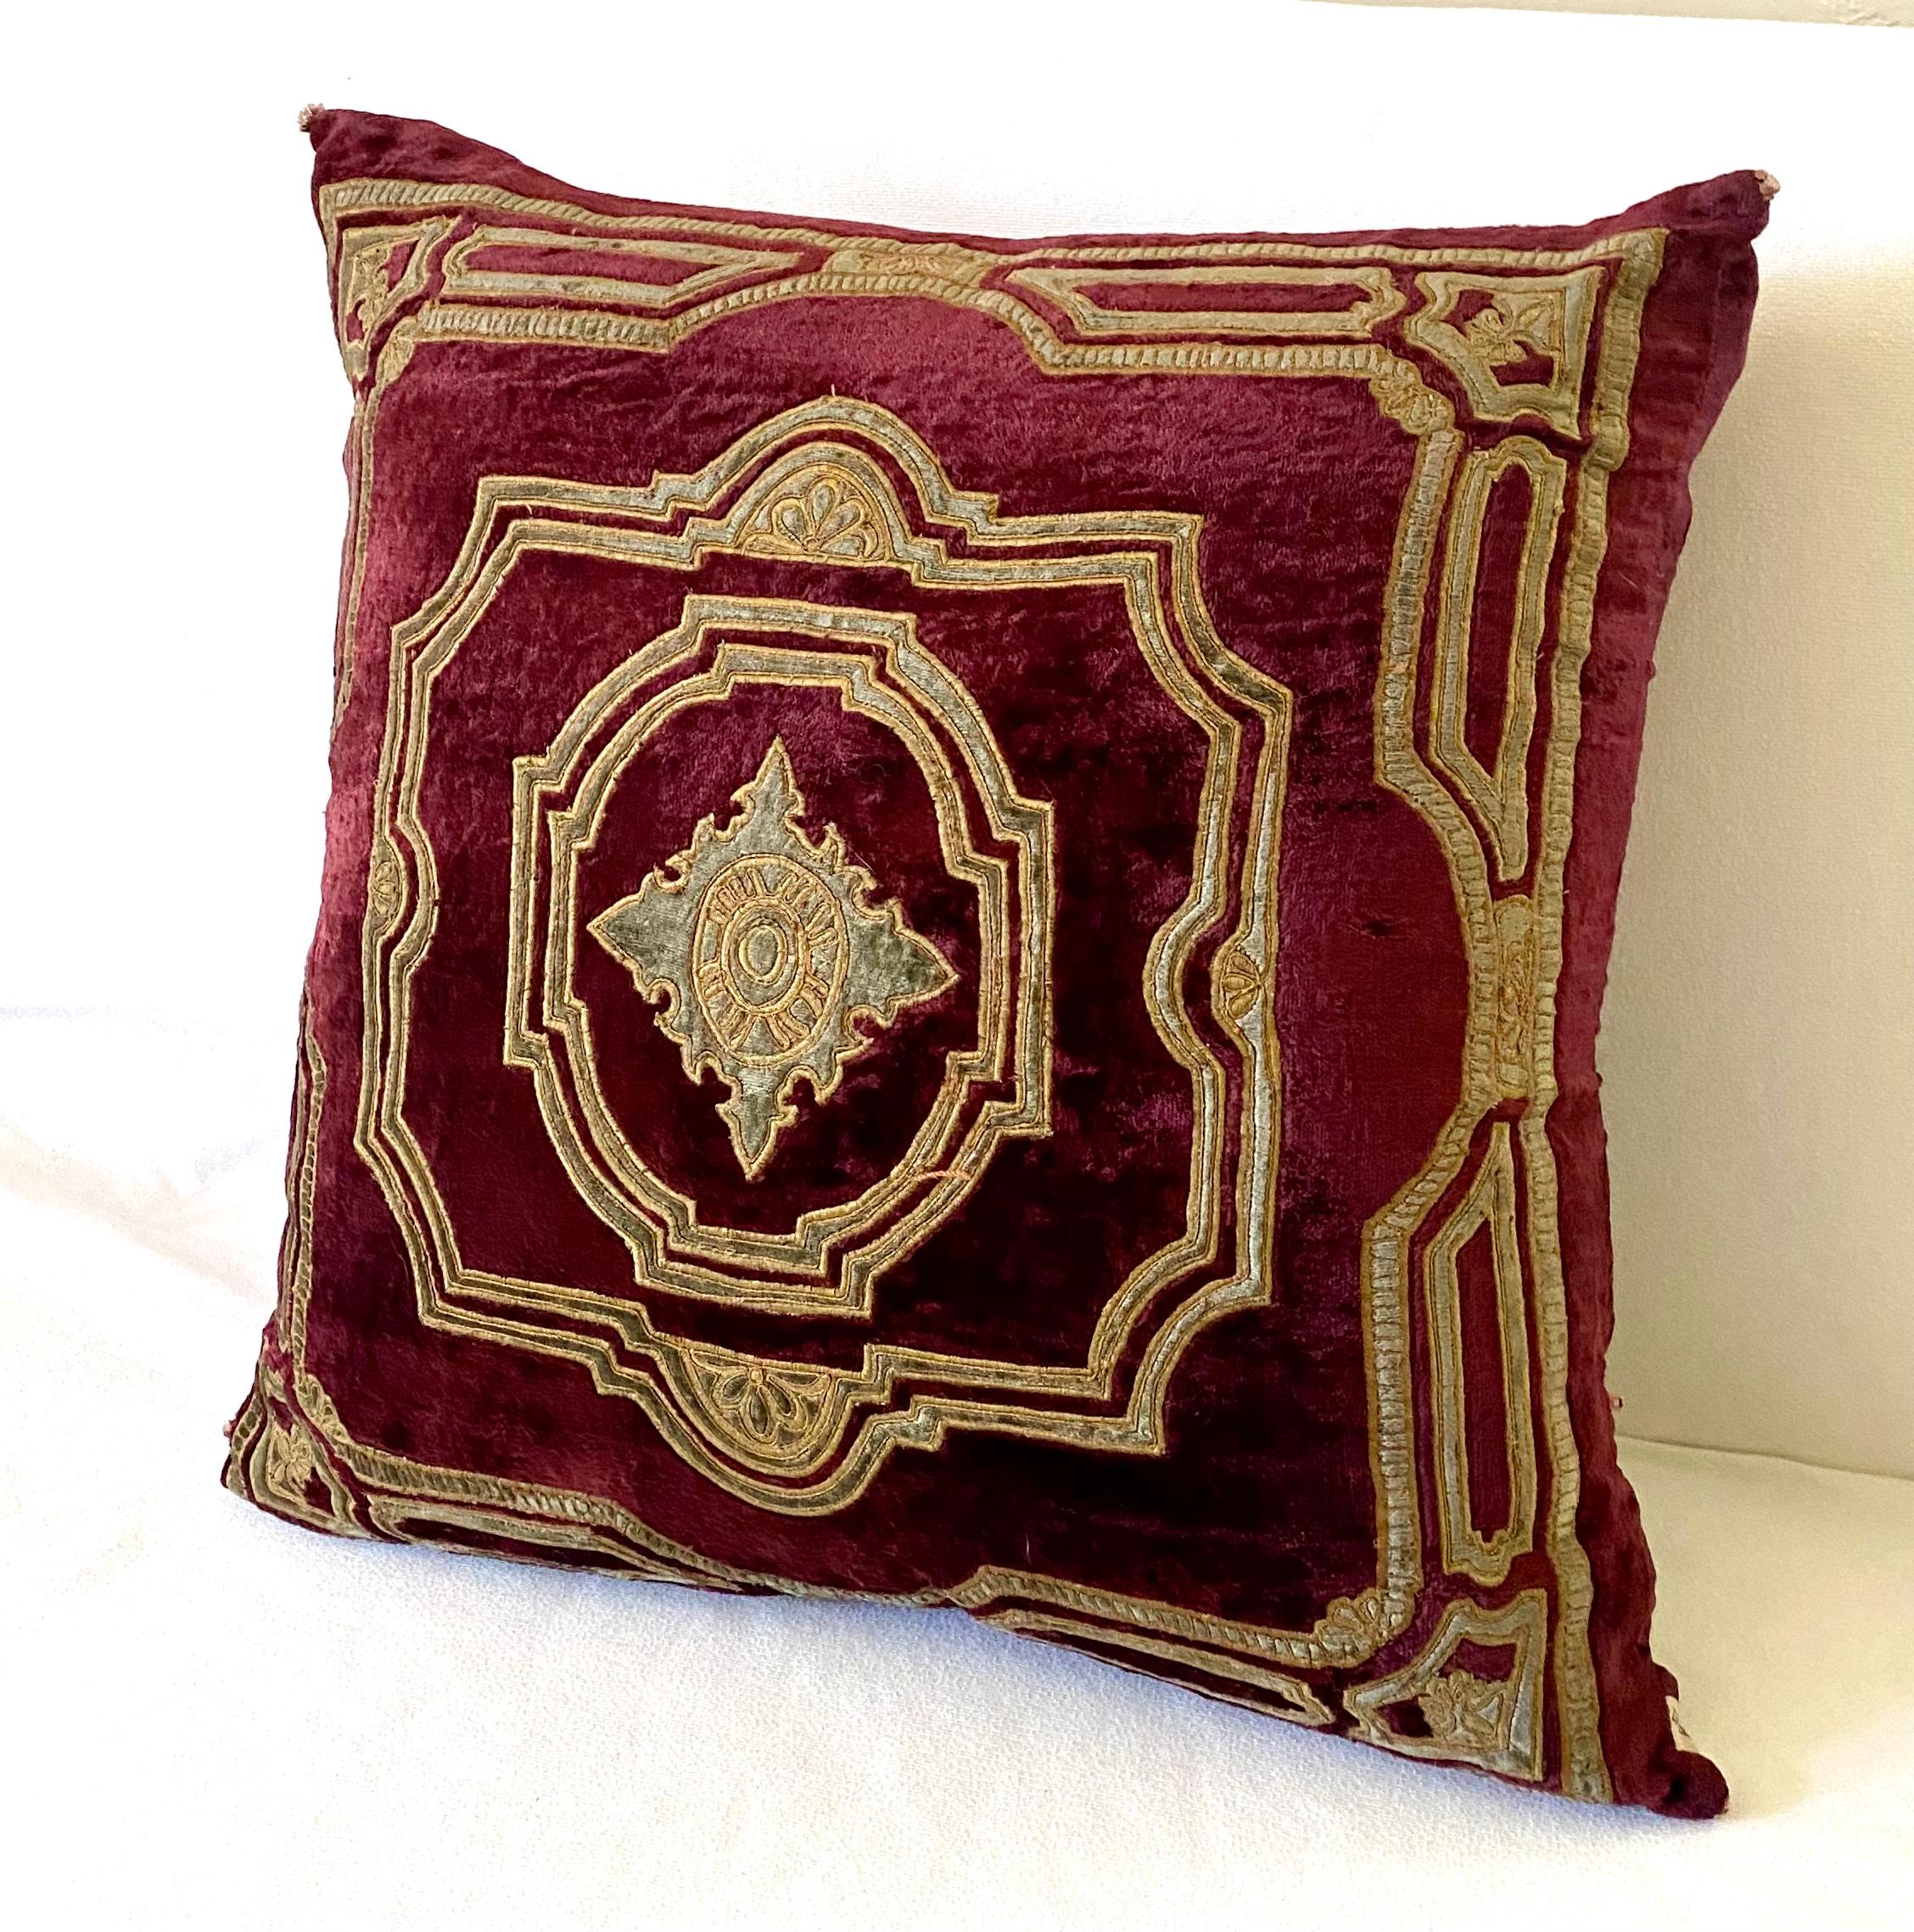 This 19 x 19 intricate embroidery pillow is fabricated in velvet and gold toned embroidery yarns.
The design follows emblems of the Renaissance in their classical nature.